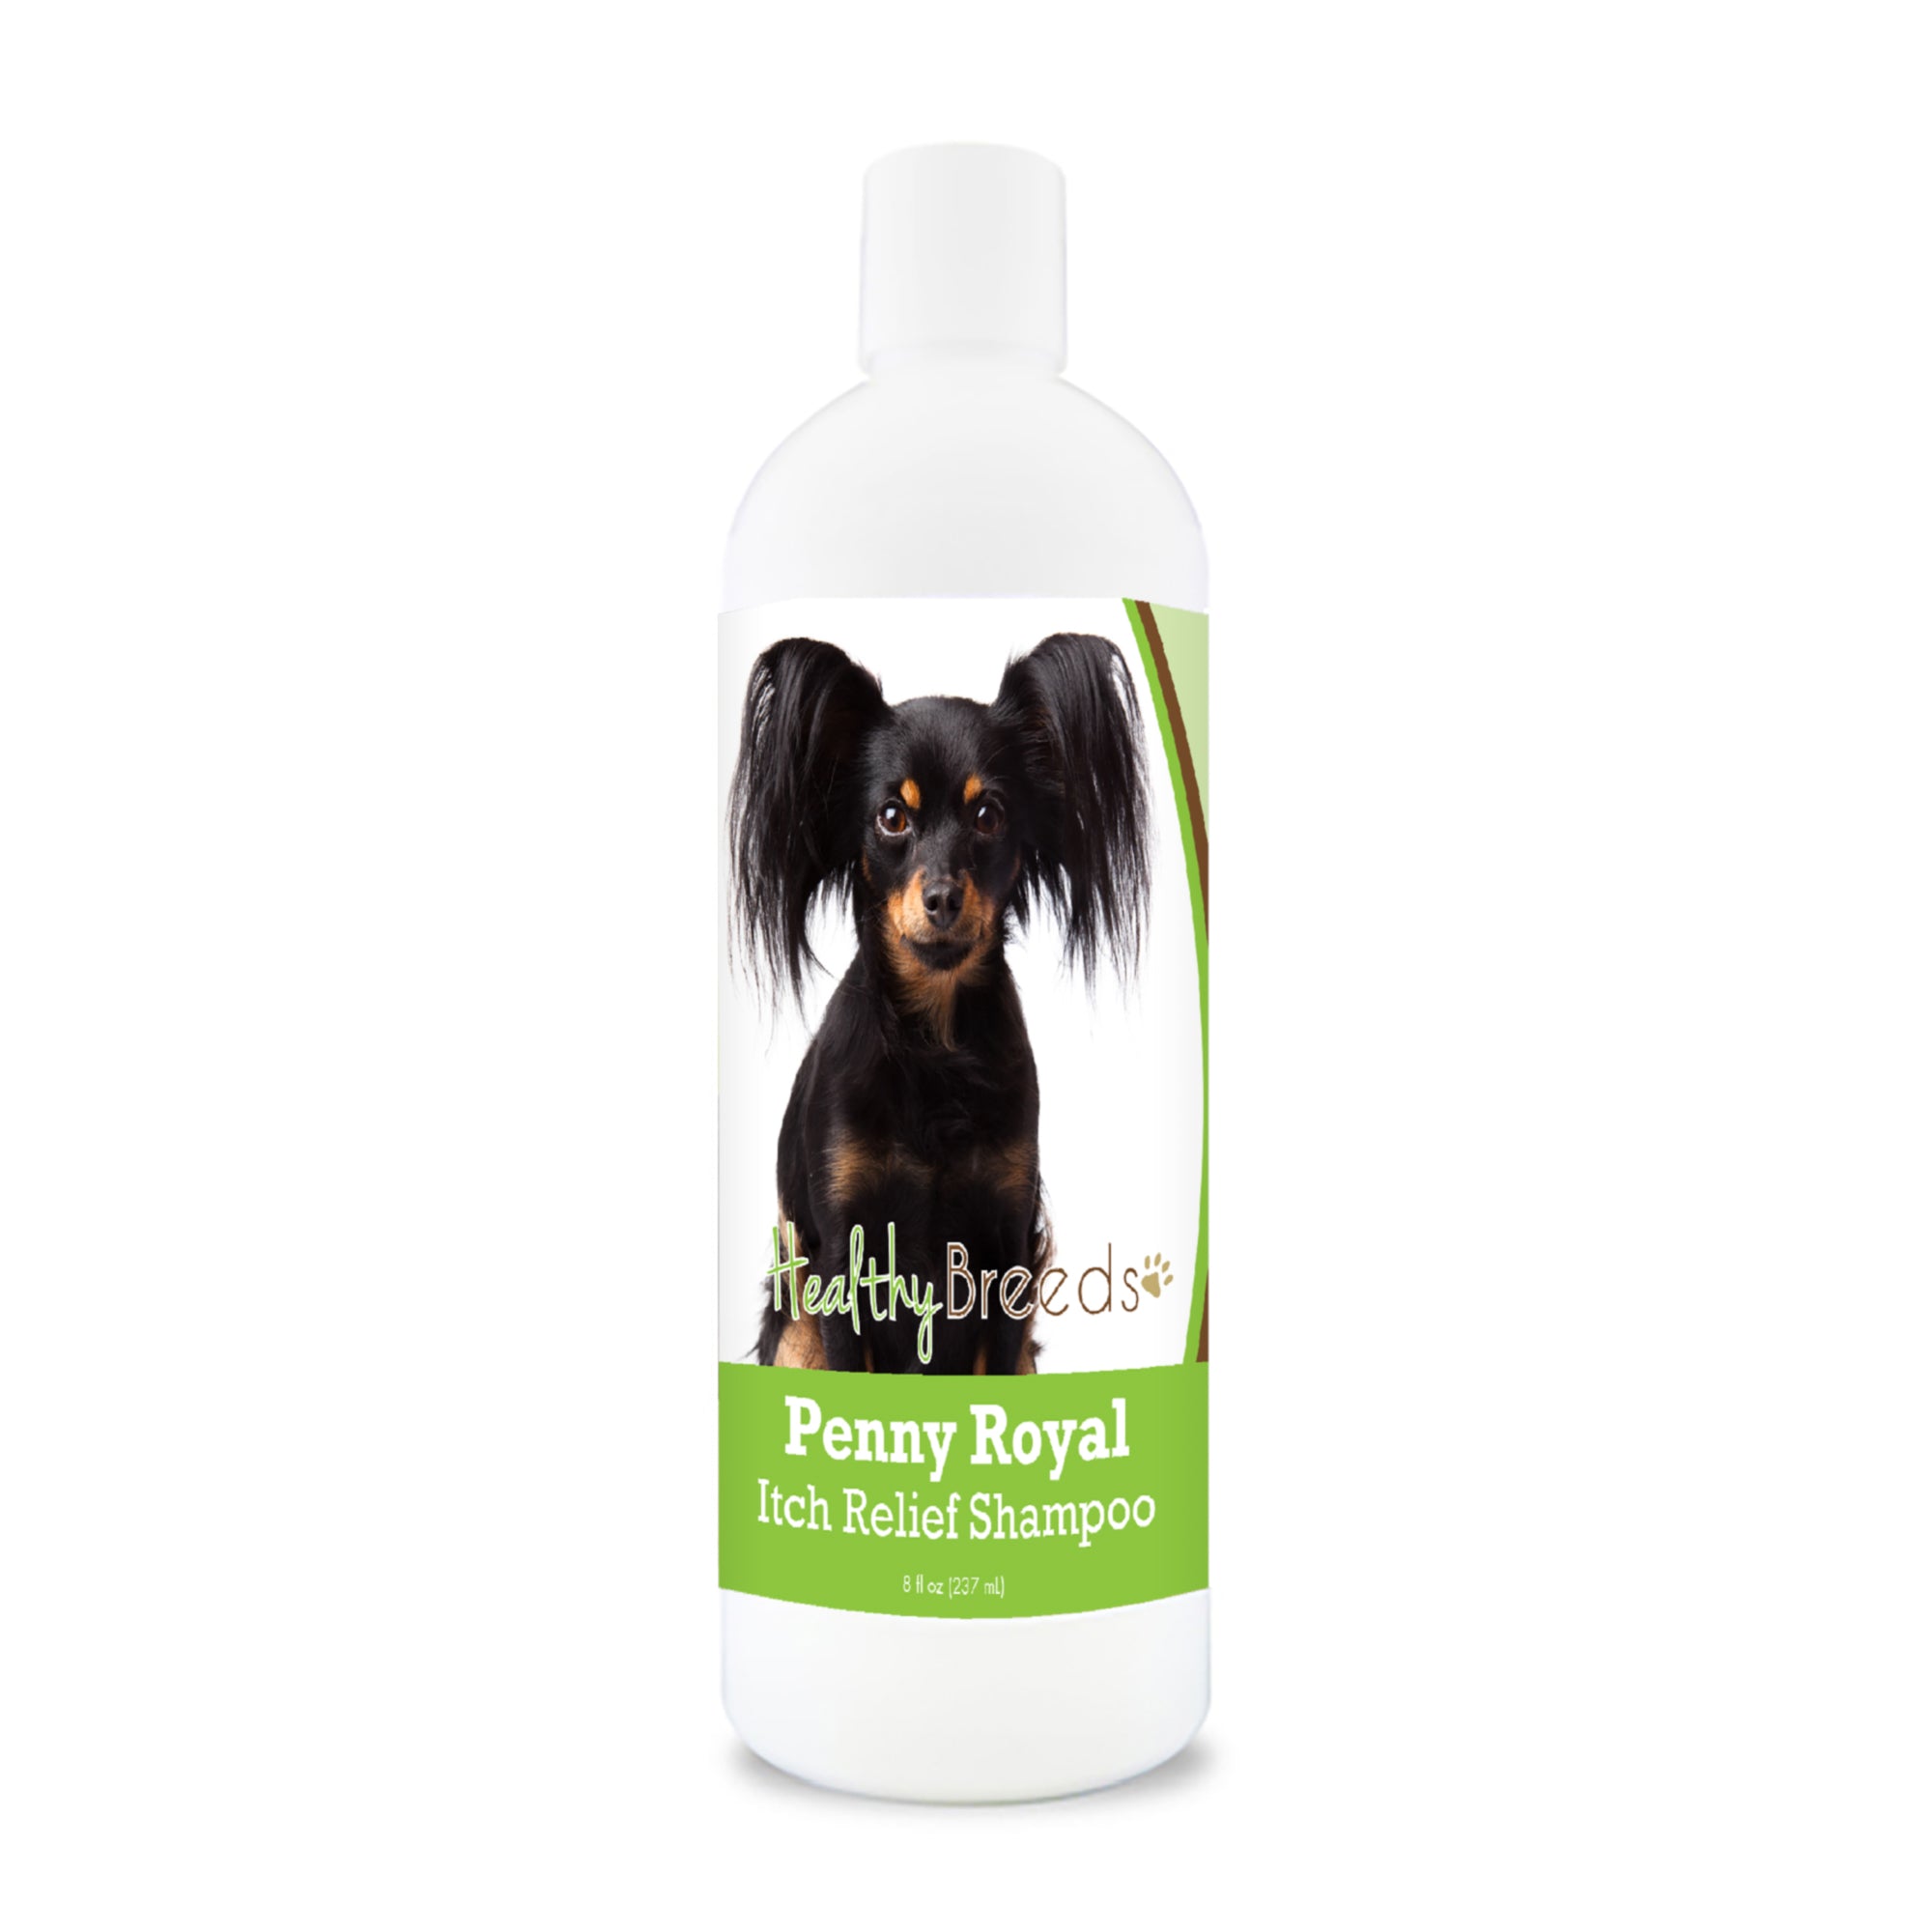 Russian Toy Terrier Penny Royal Itch Relief Shampoo 8 oz